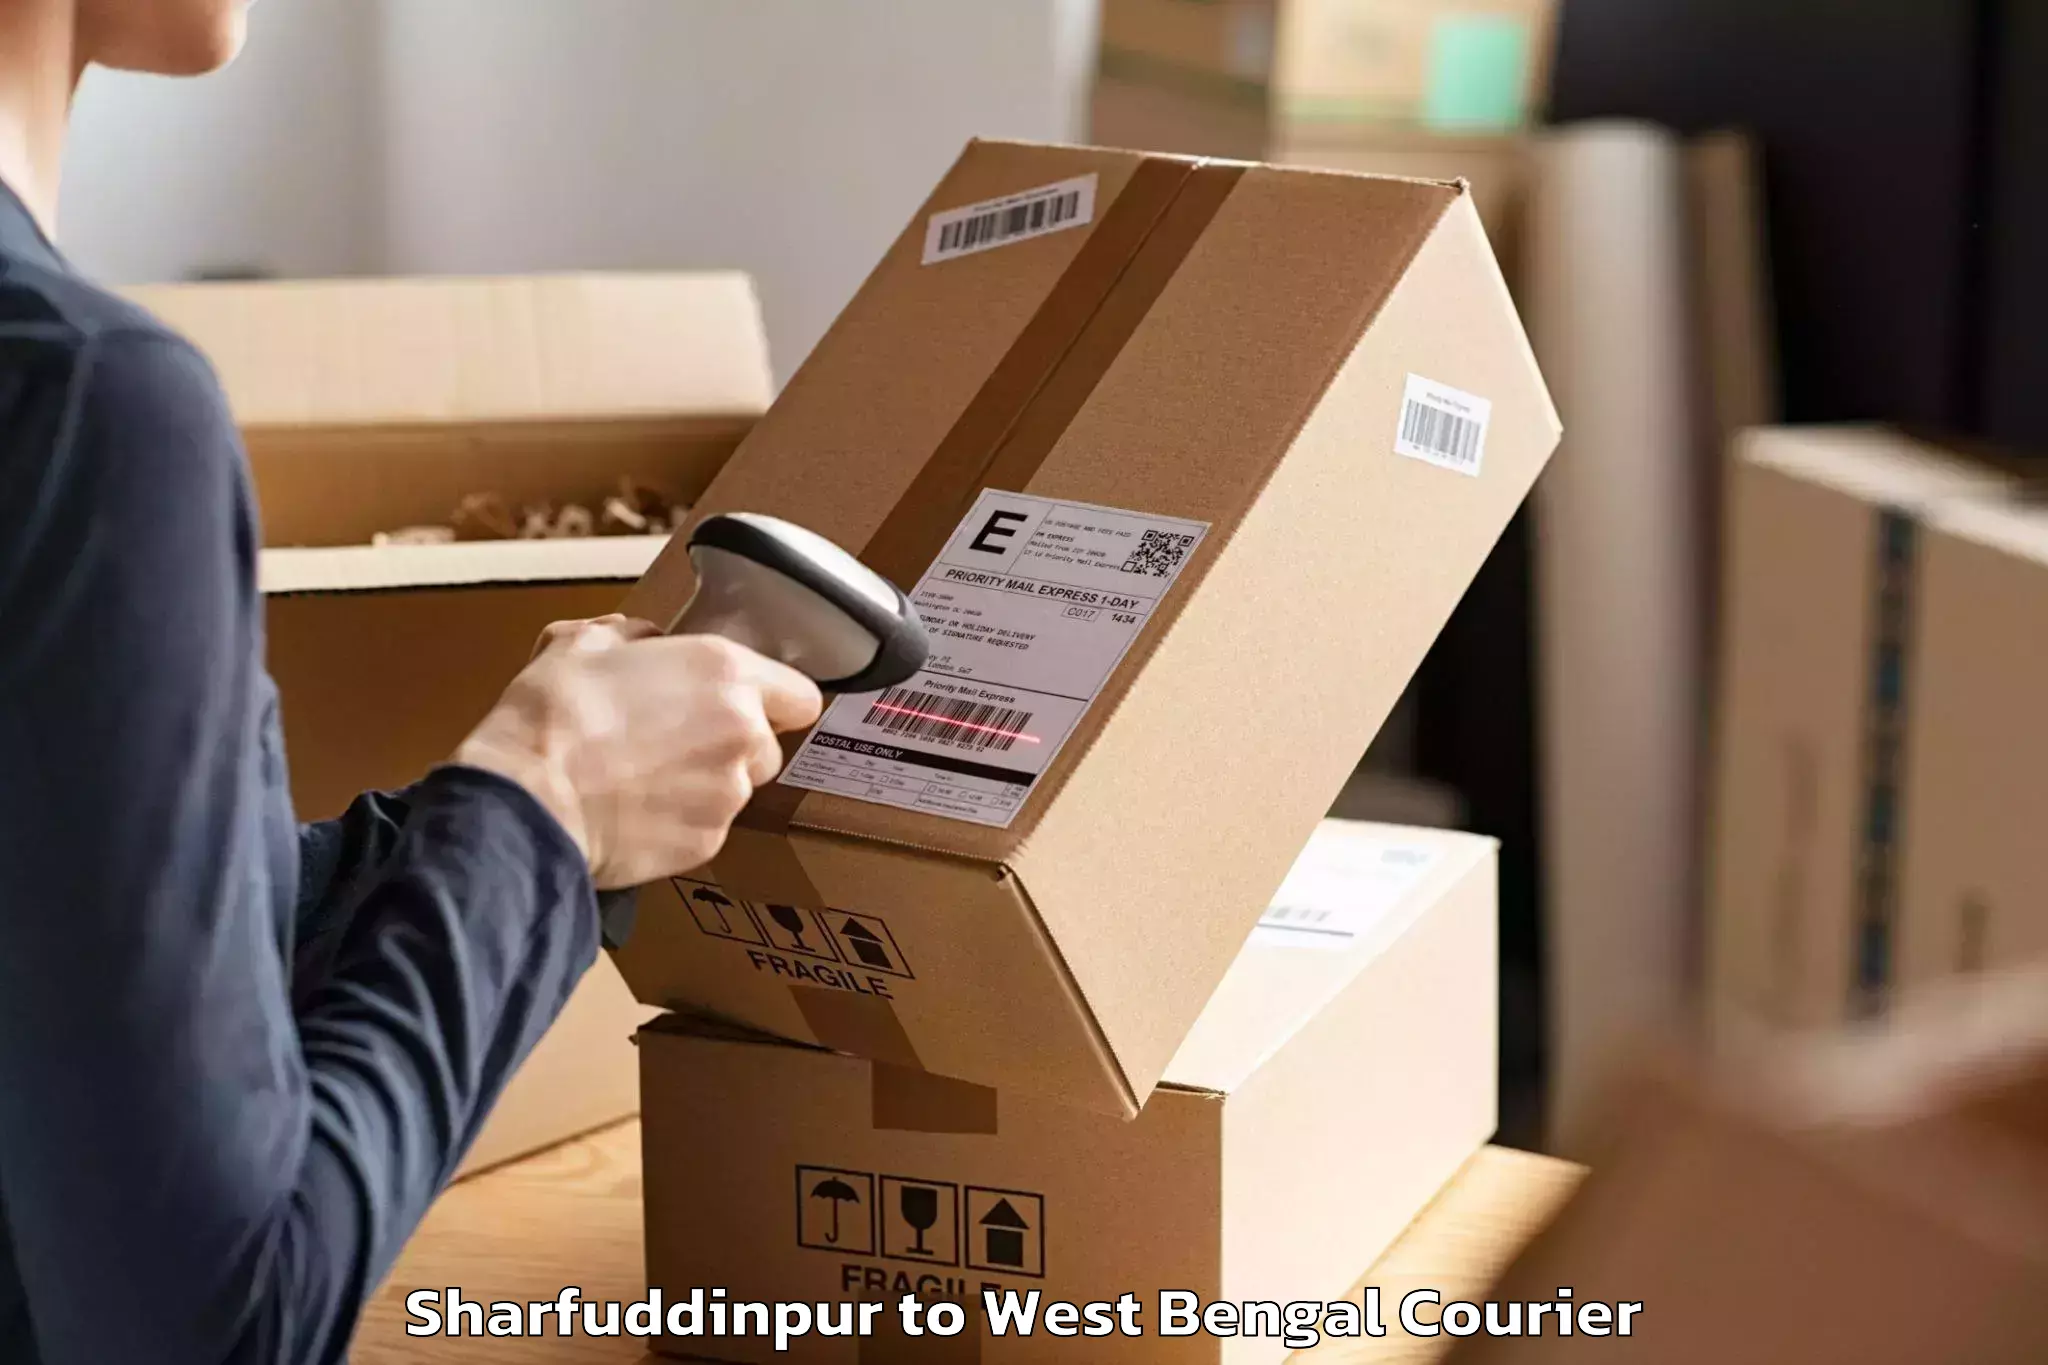 Professional movers Sharfuddinpur to West Bengal